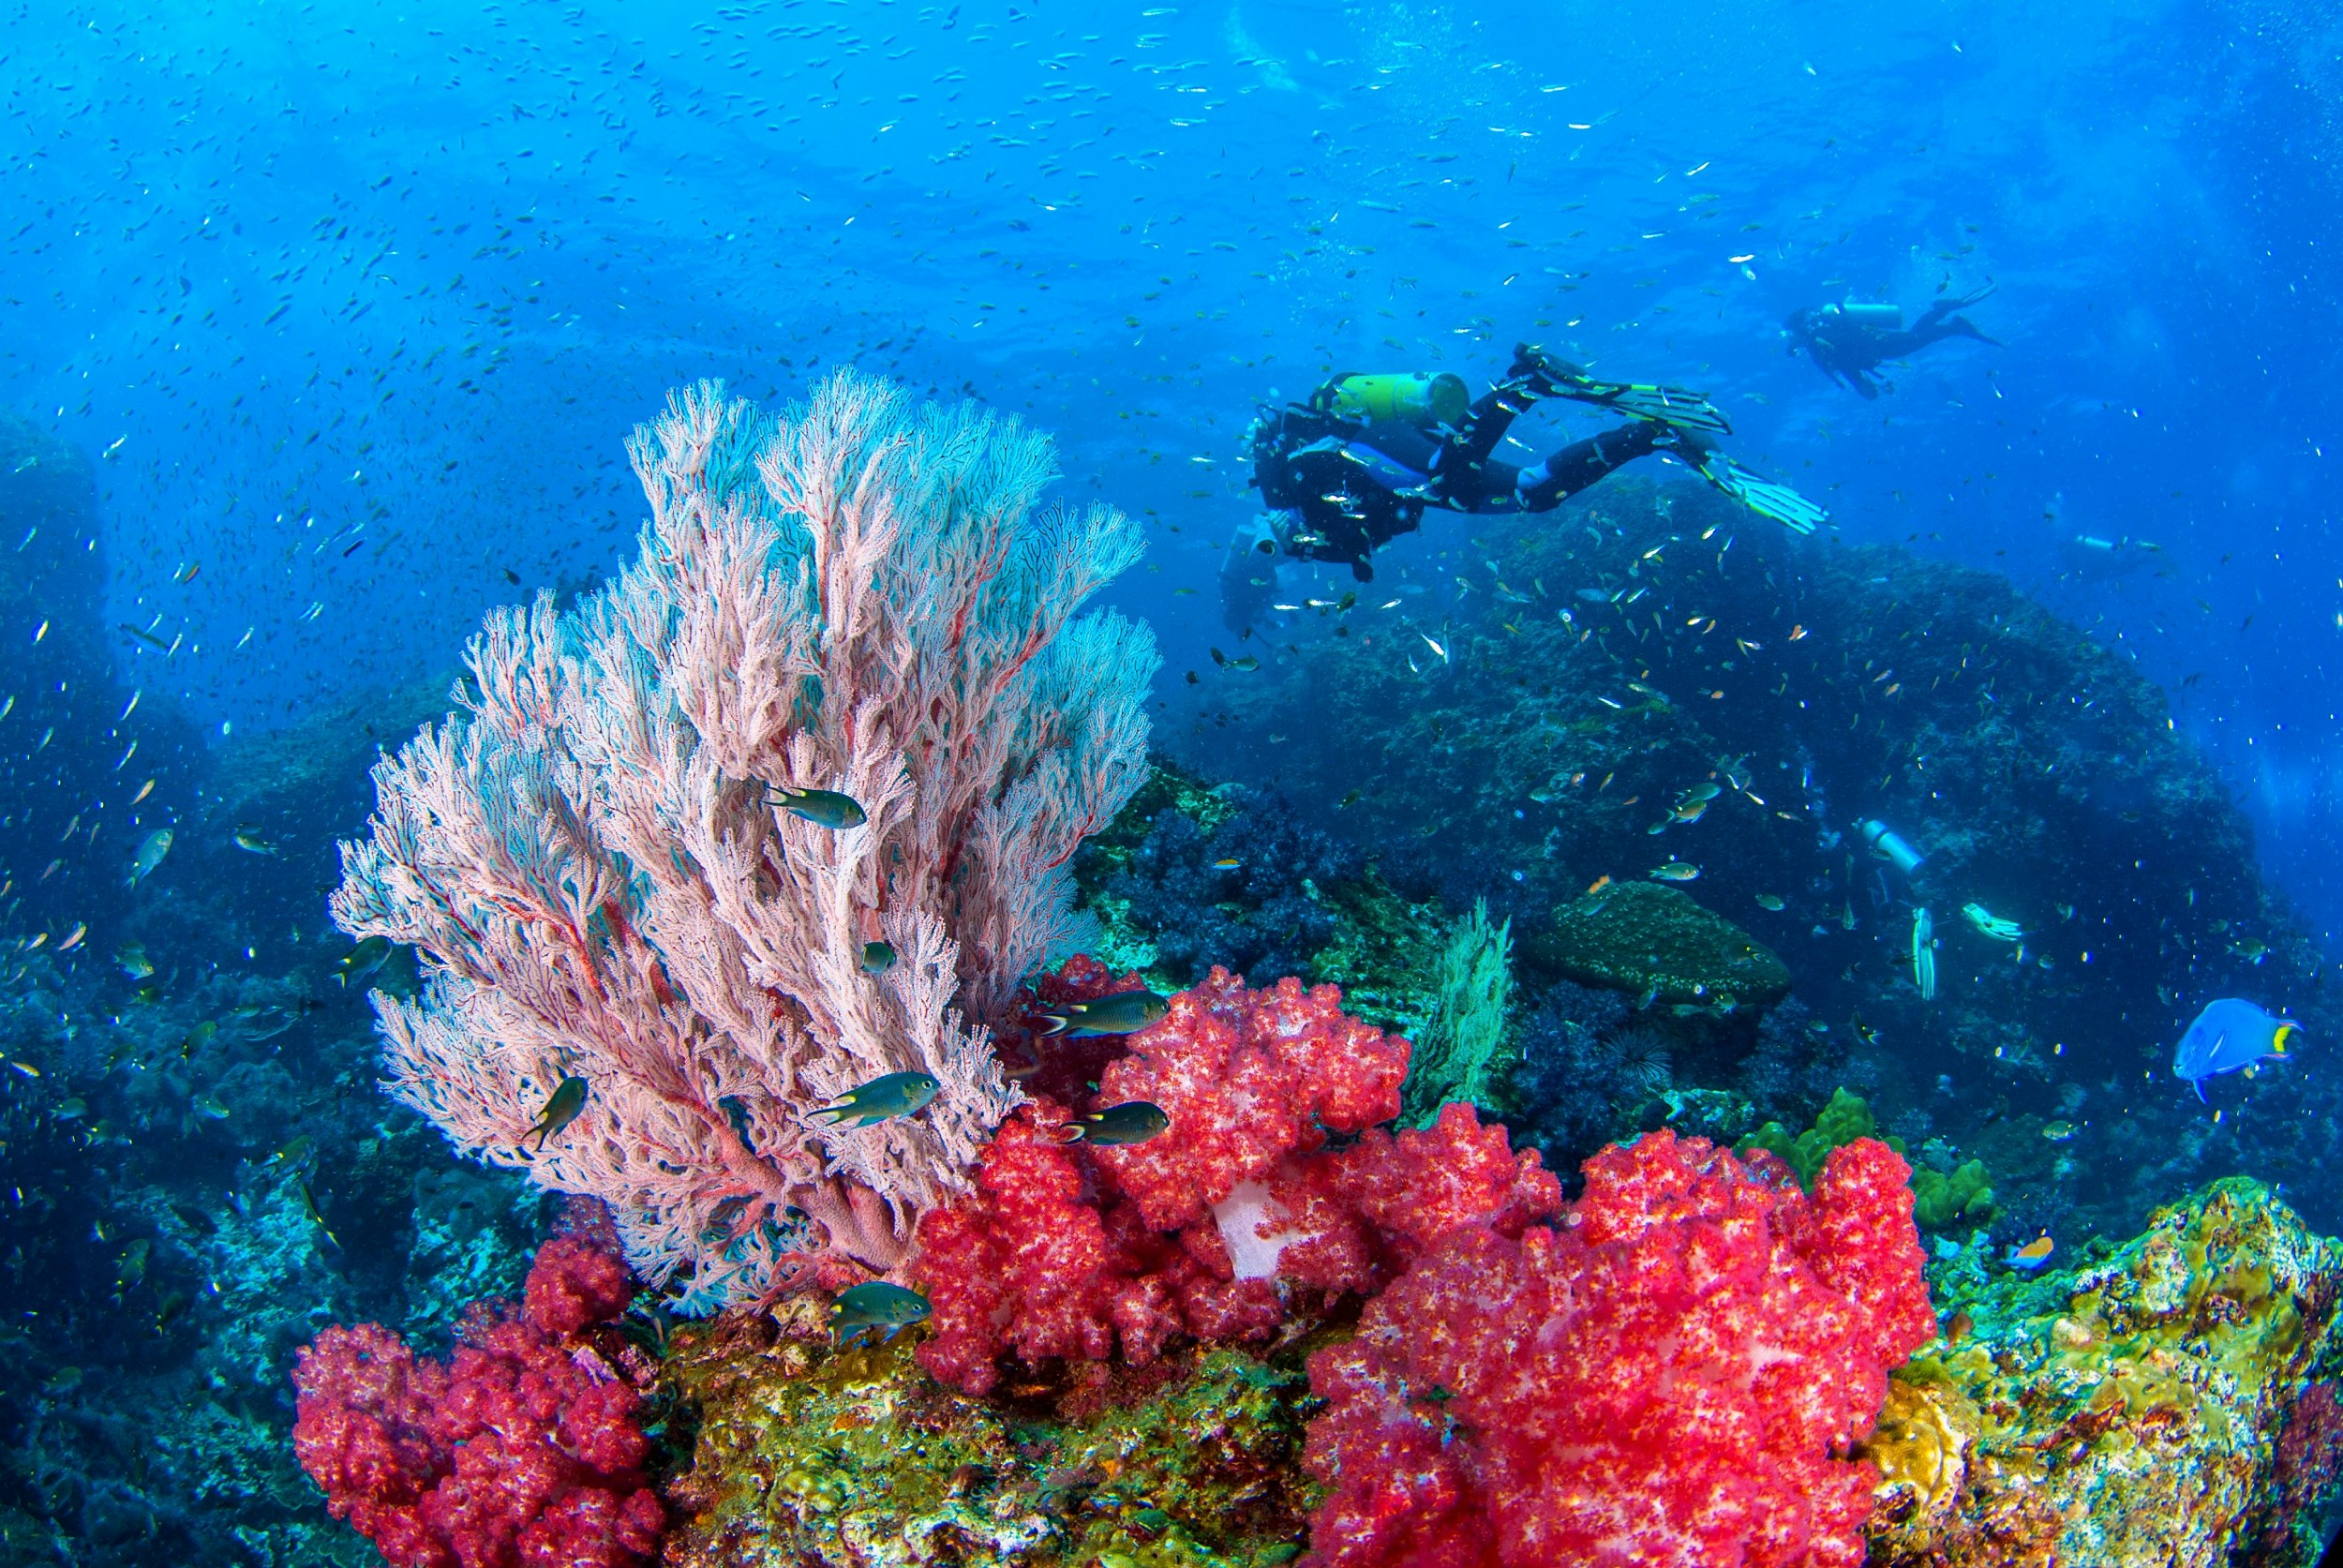 Large sections of coral in shades of pink and red fan out. Several divers swim among schools of fish, keeping their distance from the coral